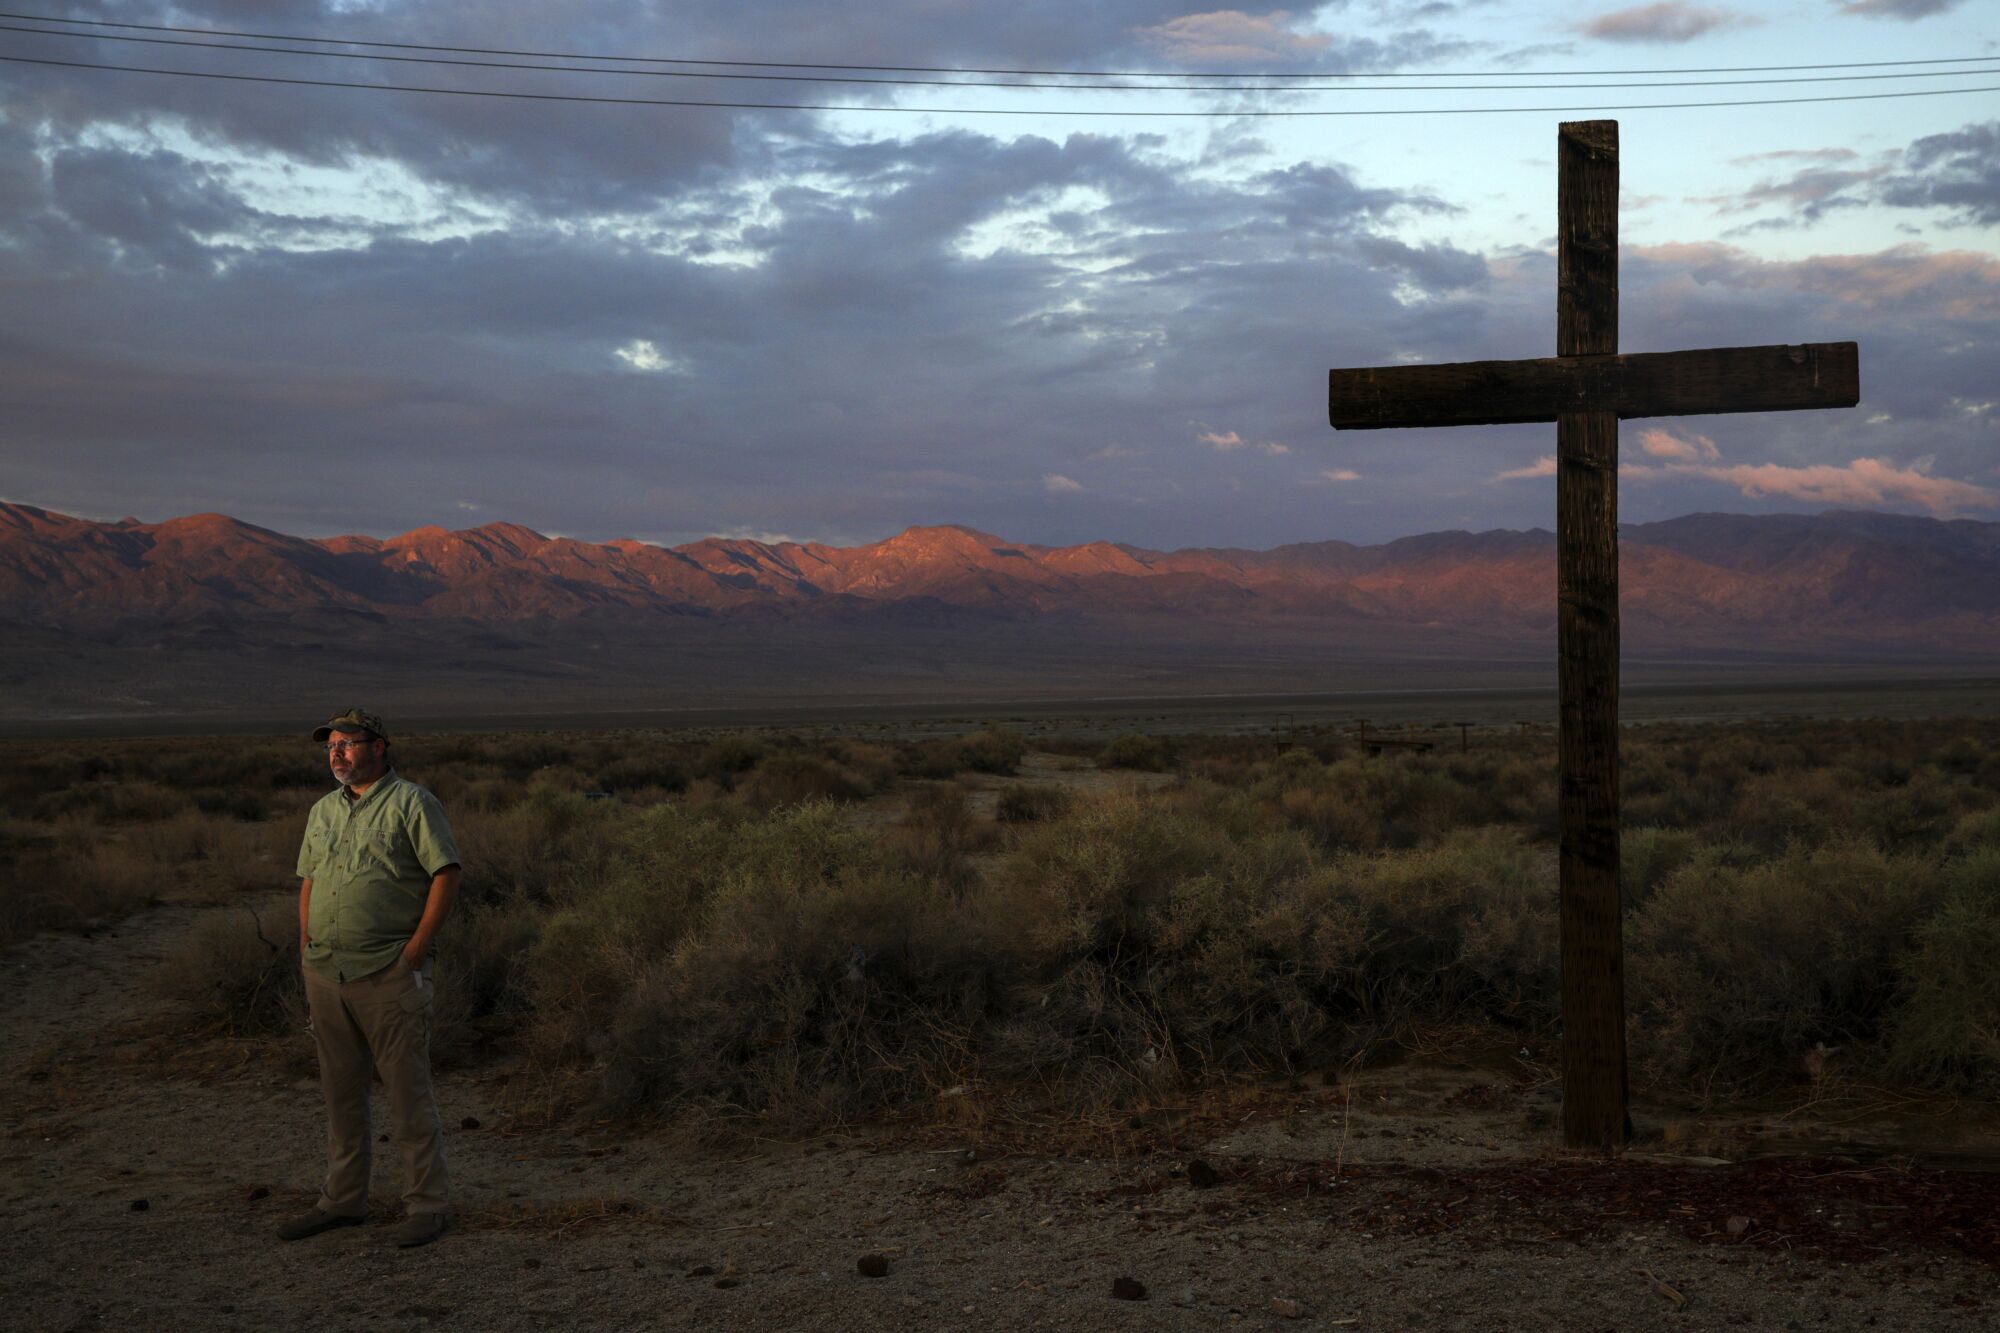 A man stands near a large cross against the backdrop of a desert valley rimmed by mountains